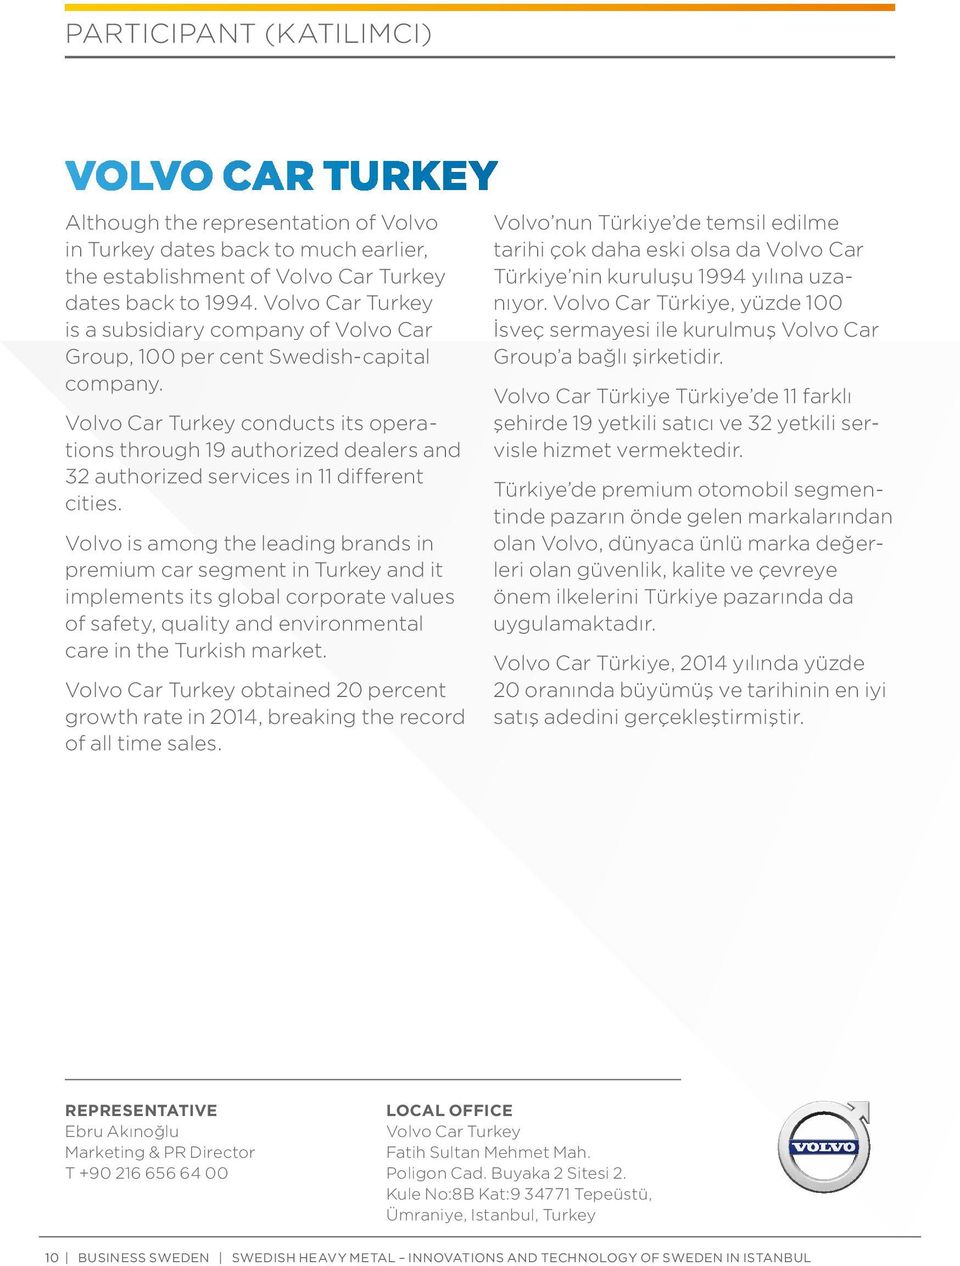 Volvo Car Turkey conducts its operations through 19 authorized dealers and 32 authorized services in 11 different cities.